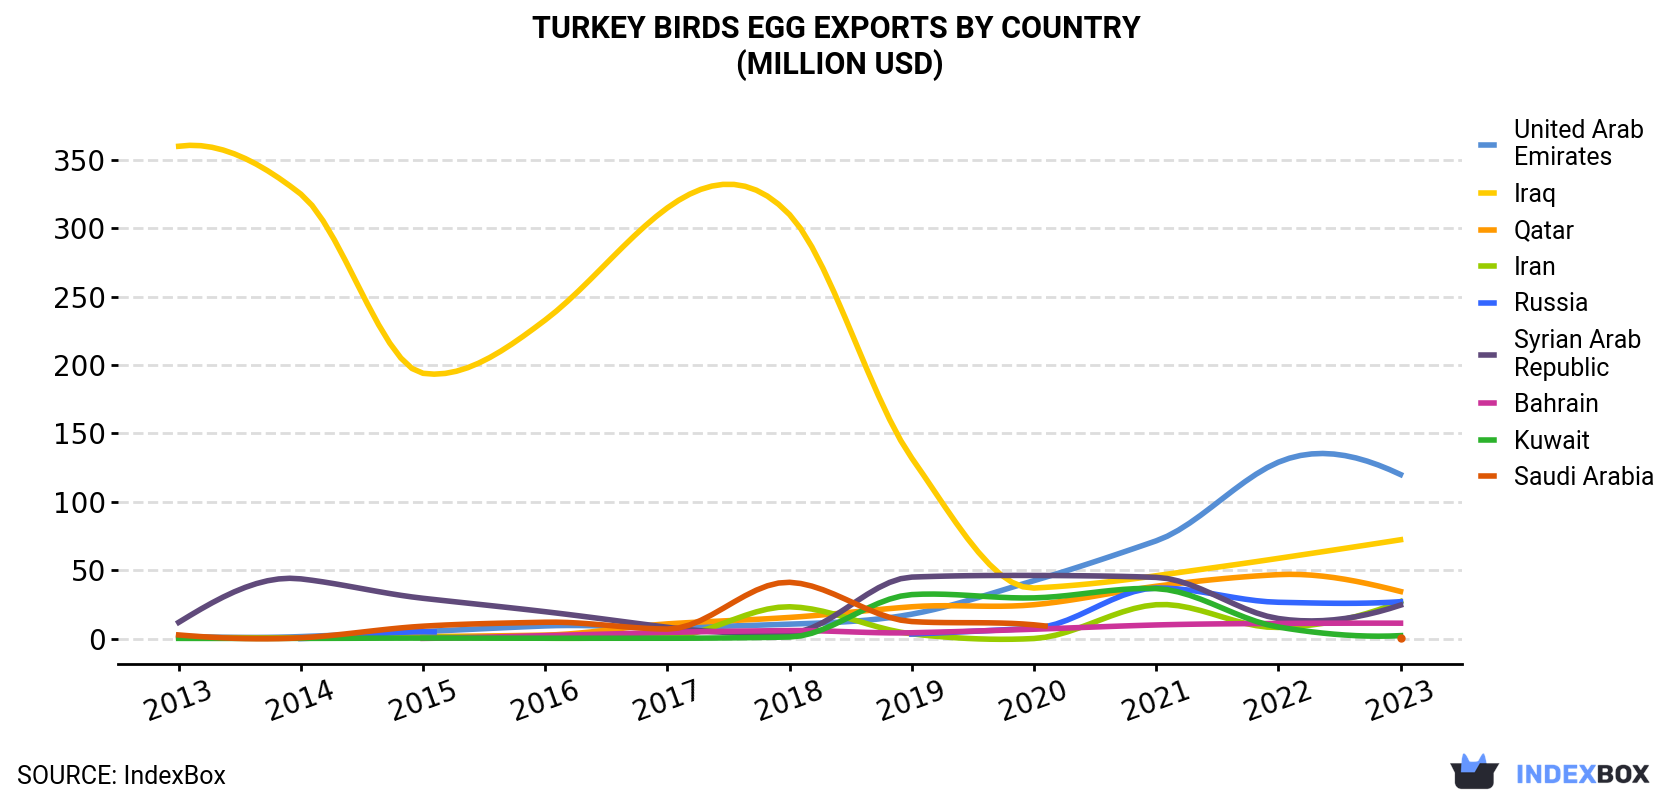 Turkey Birds Egg Exports By Country (Million USD)